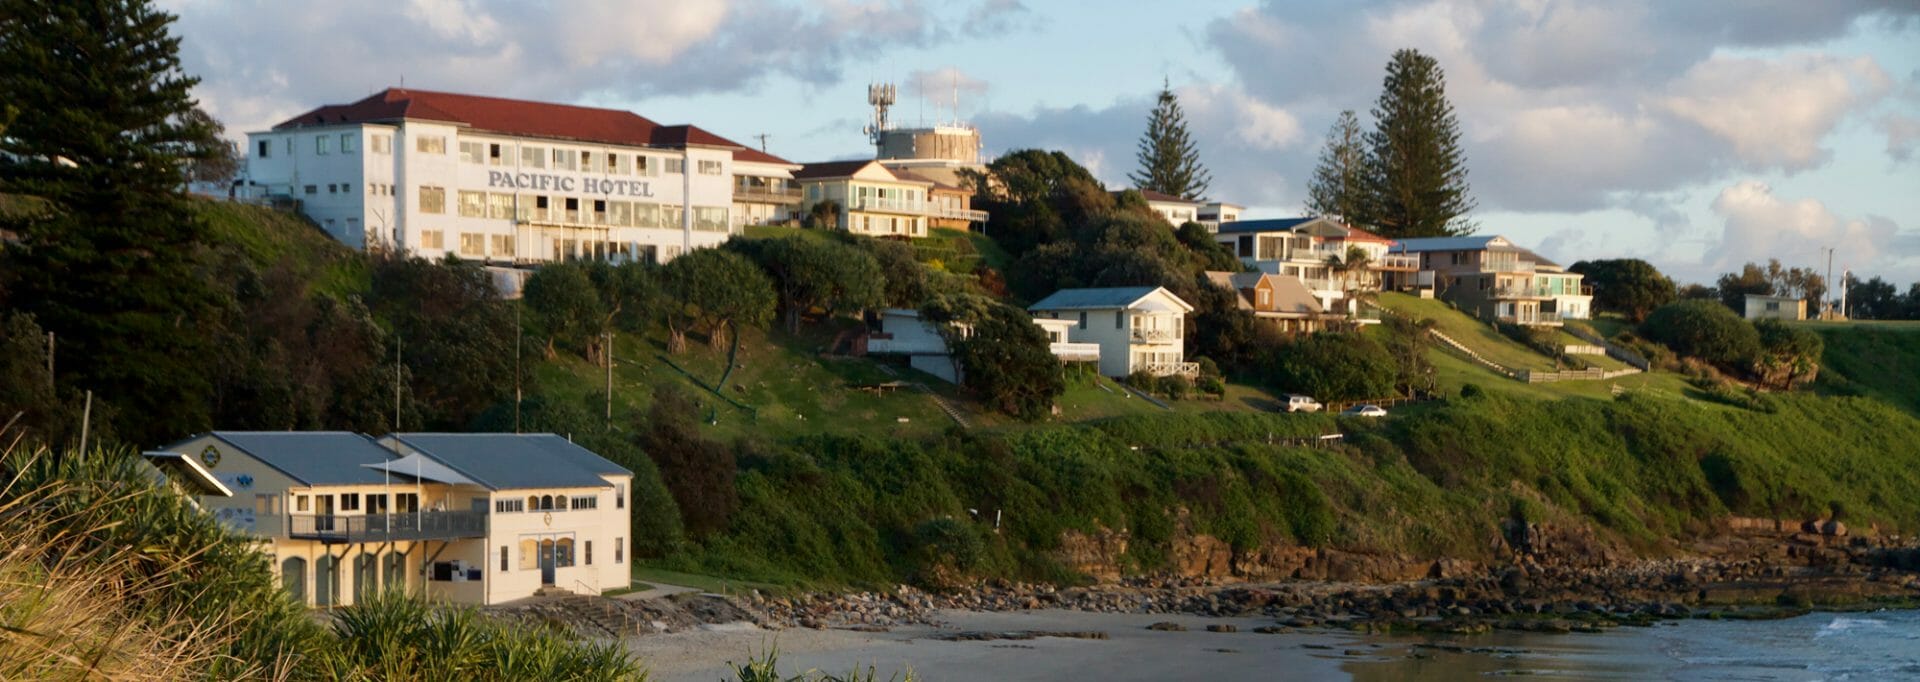 Spend a weekend in Yamba - Our Top 10 | Coastbeat